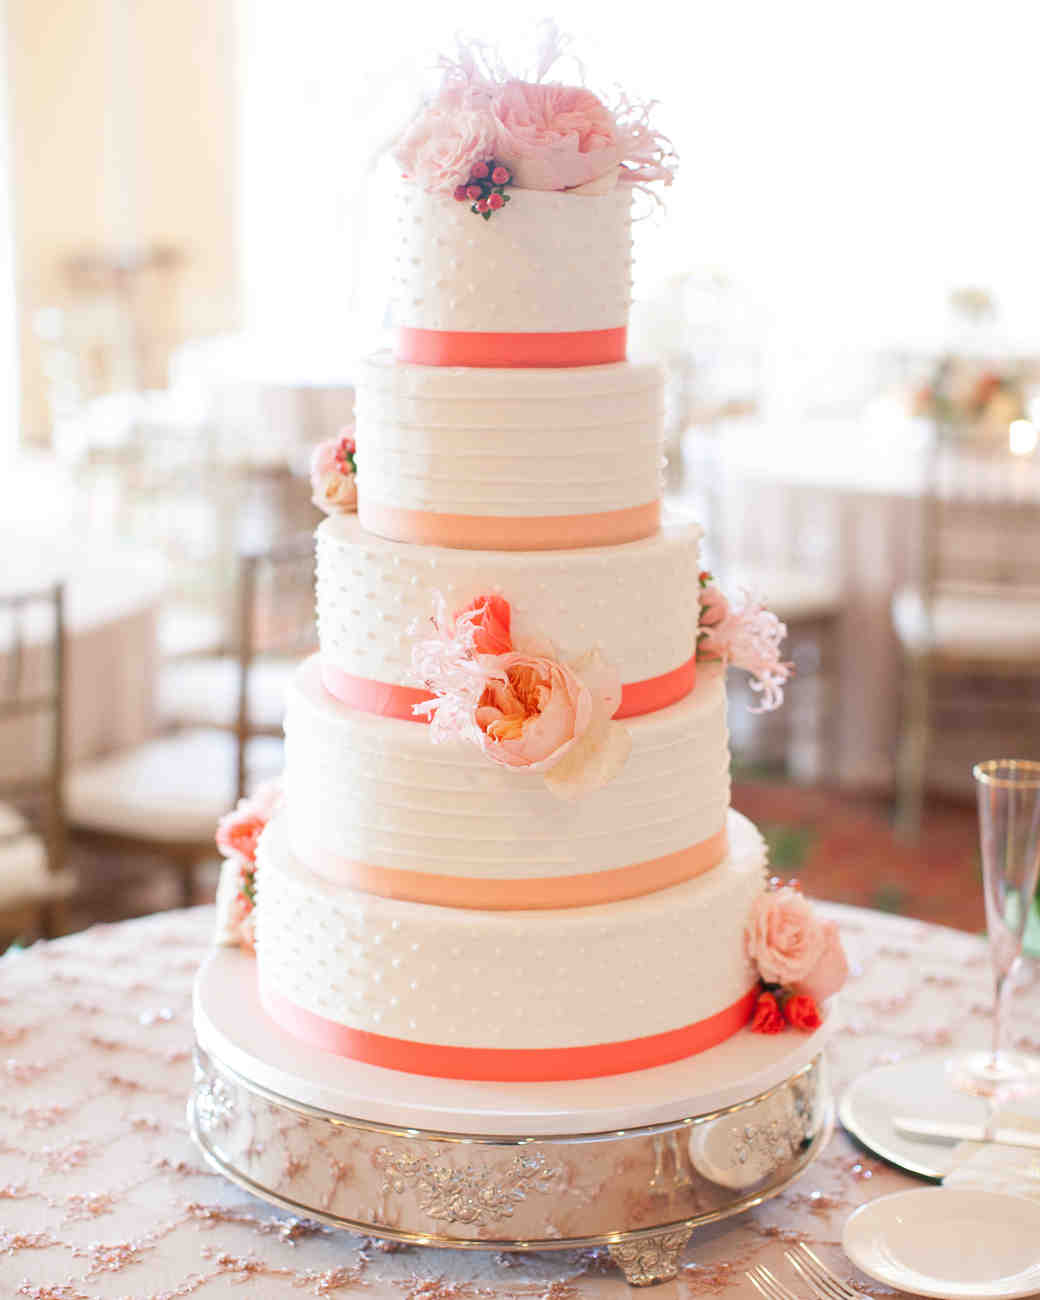 What are some common elements for a fall wedding cake?